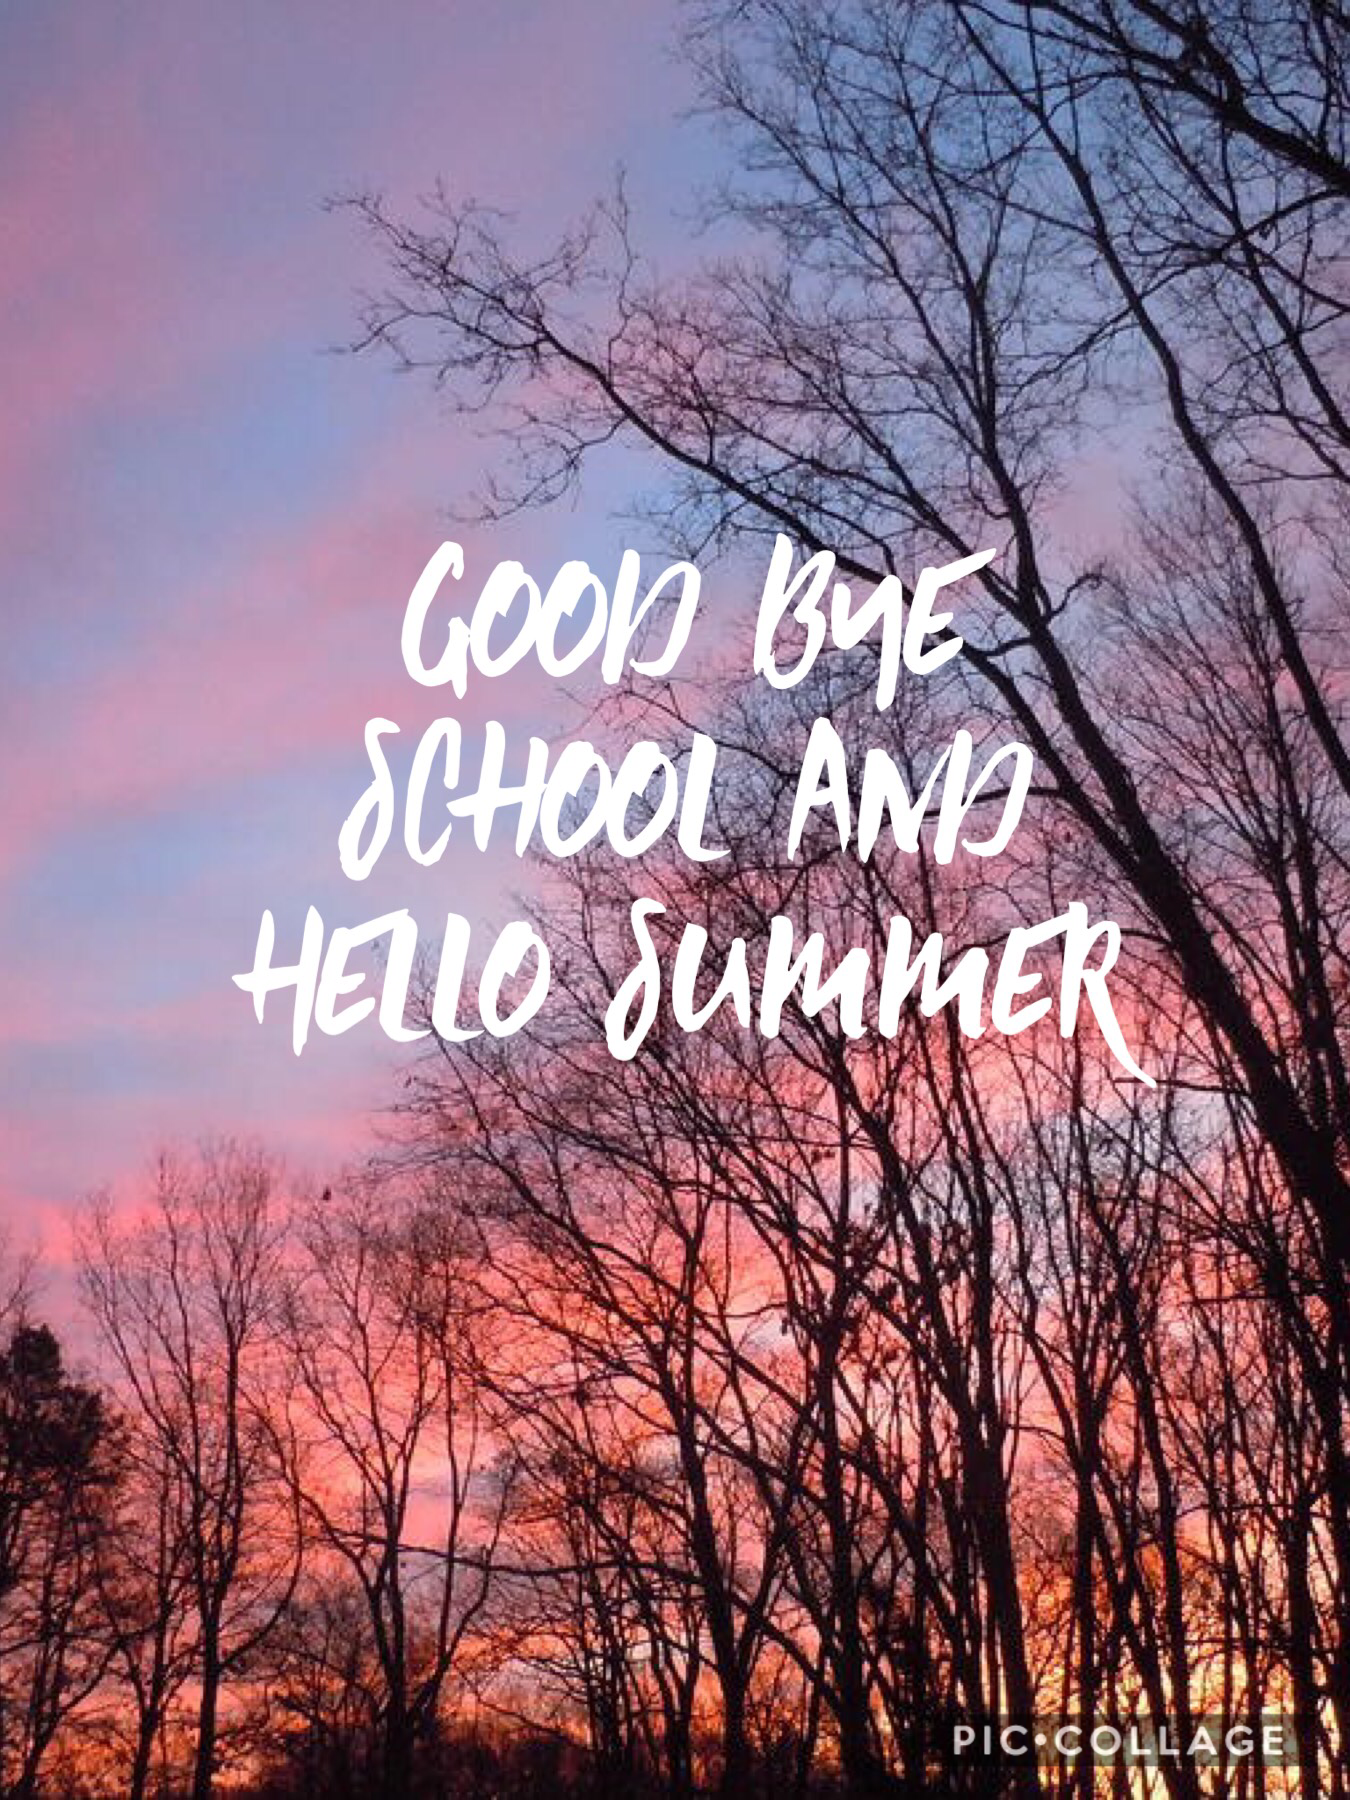 Comment down below who else is exited for school to be over!